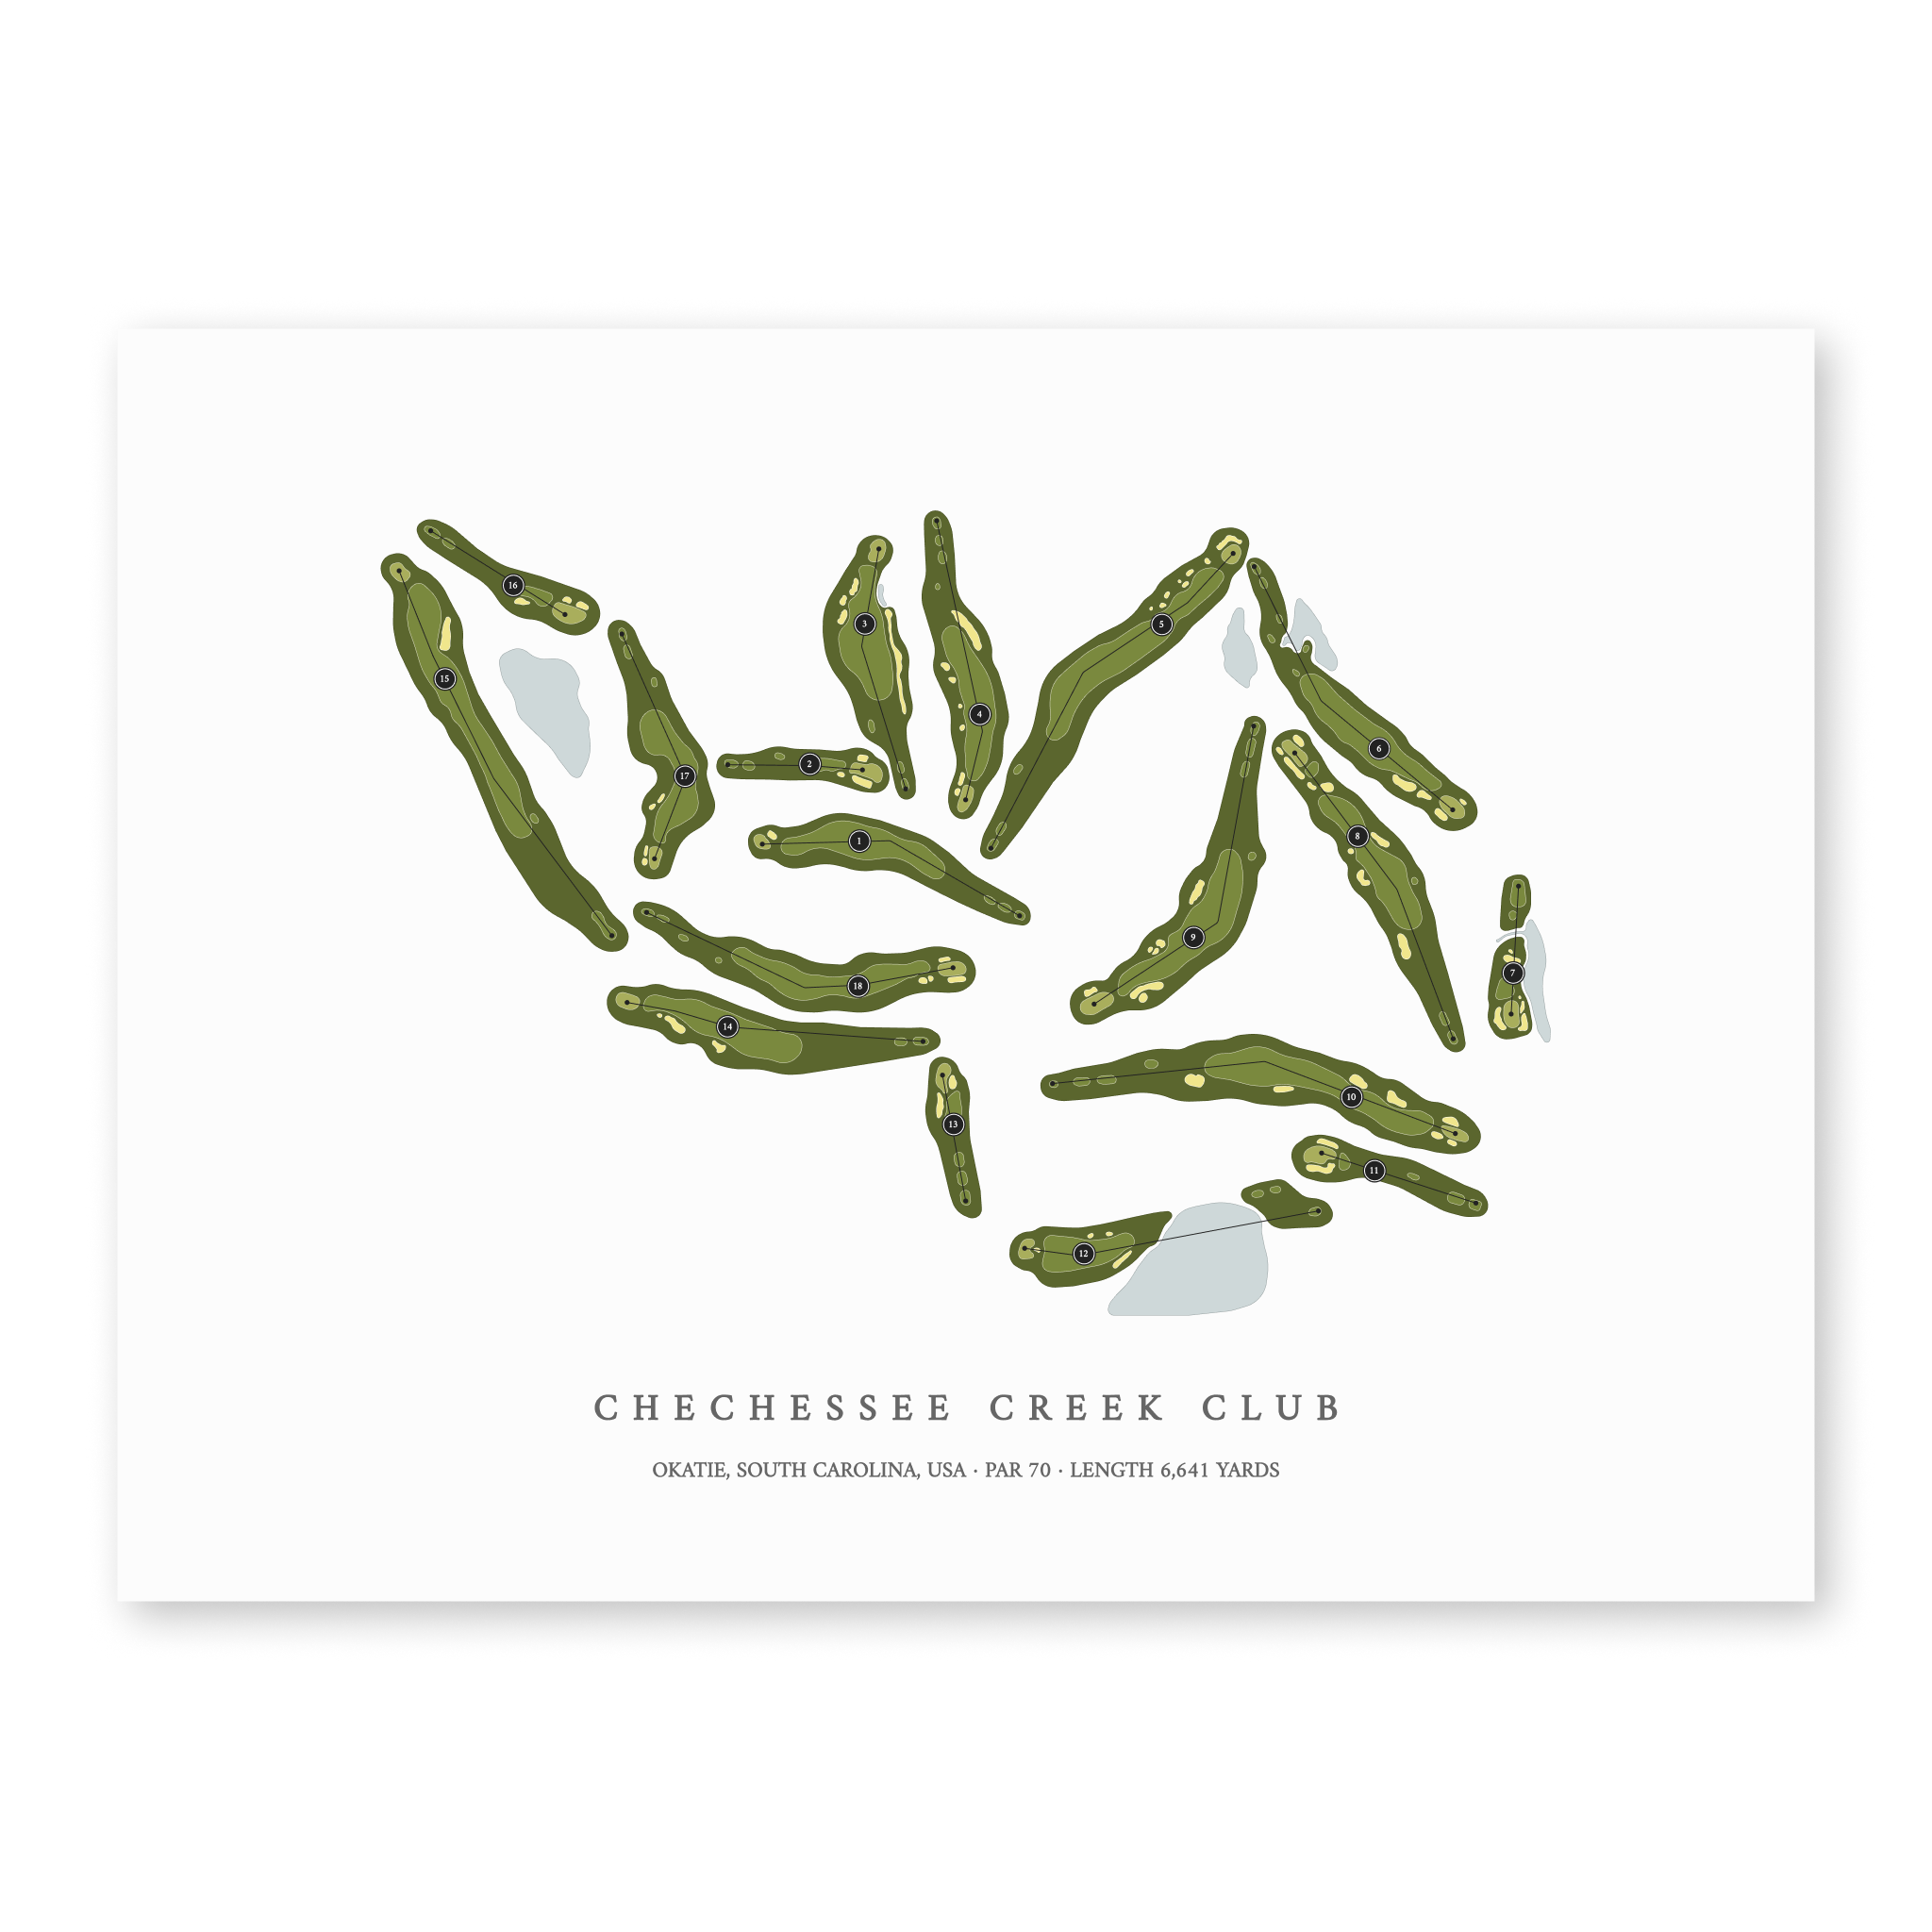 Chechessee Creek Club| Golf Course Print | Unframed With Hole Numbers #hole numbers_yes